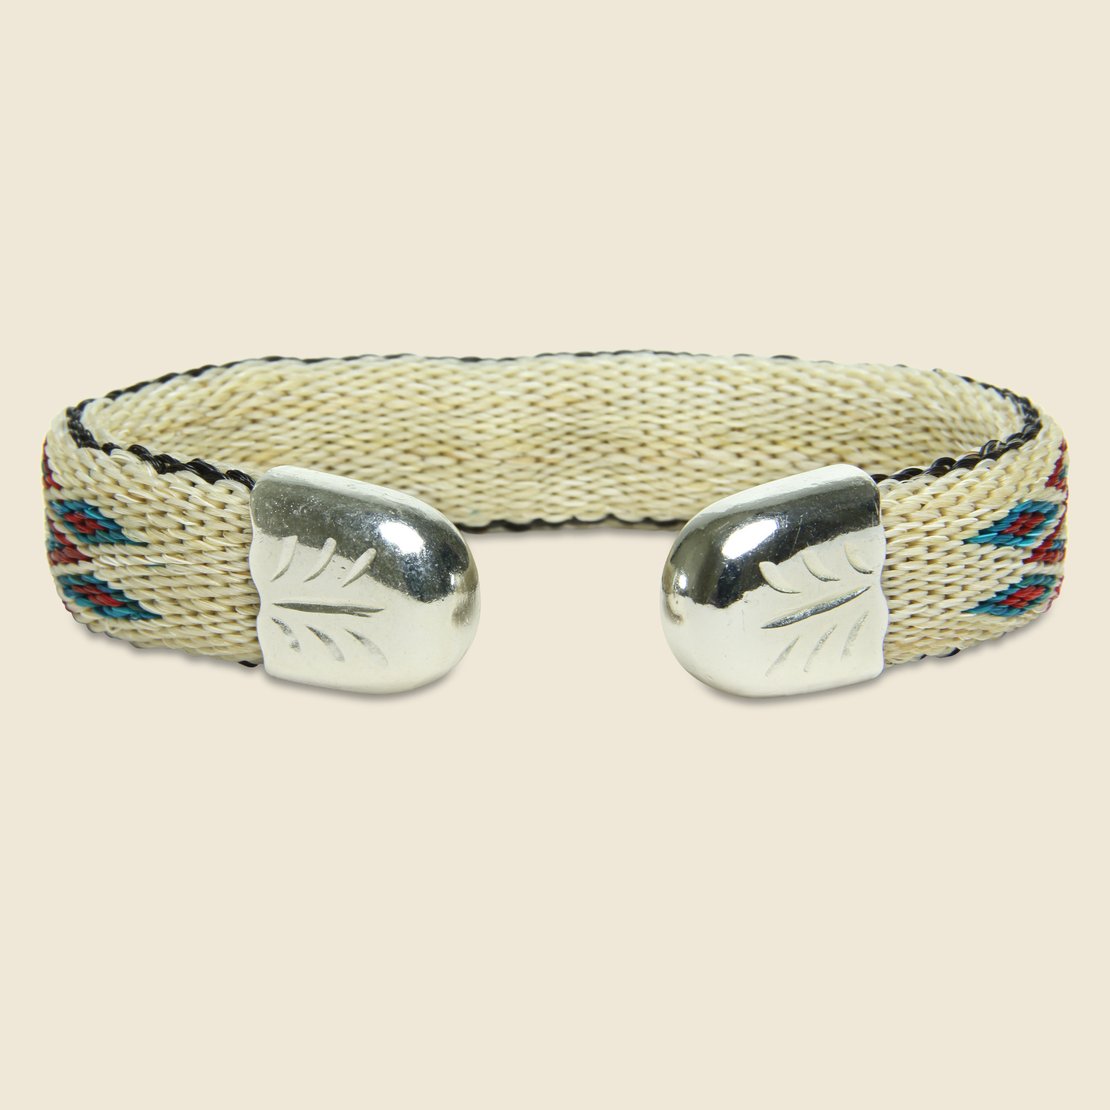 Bendable Horsehair Bracelet - Ivory/Turquoise/Red - Chamula - STAG Provisions - Accessories - Cuffs